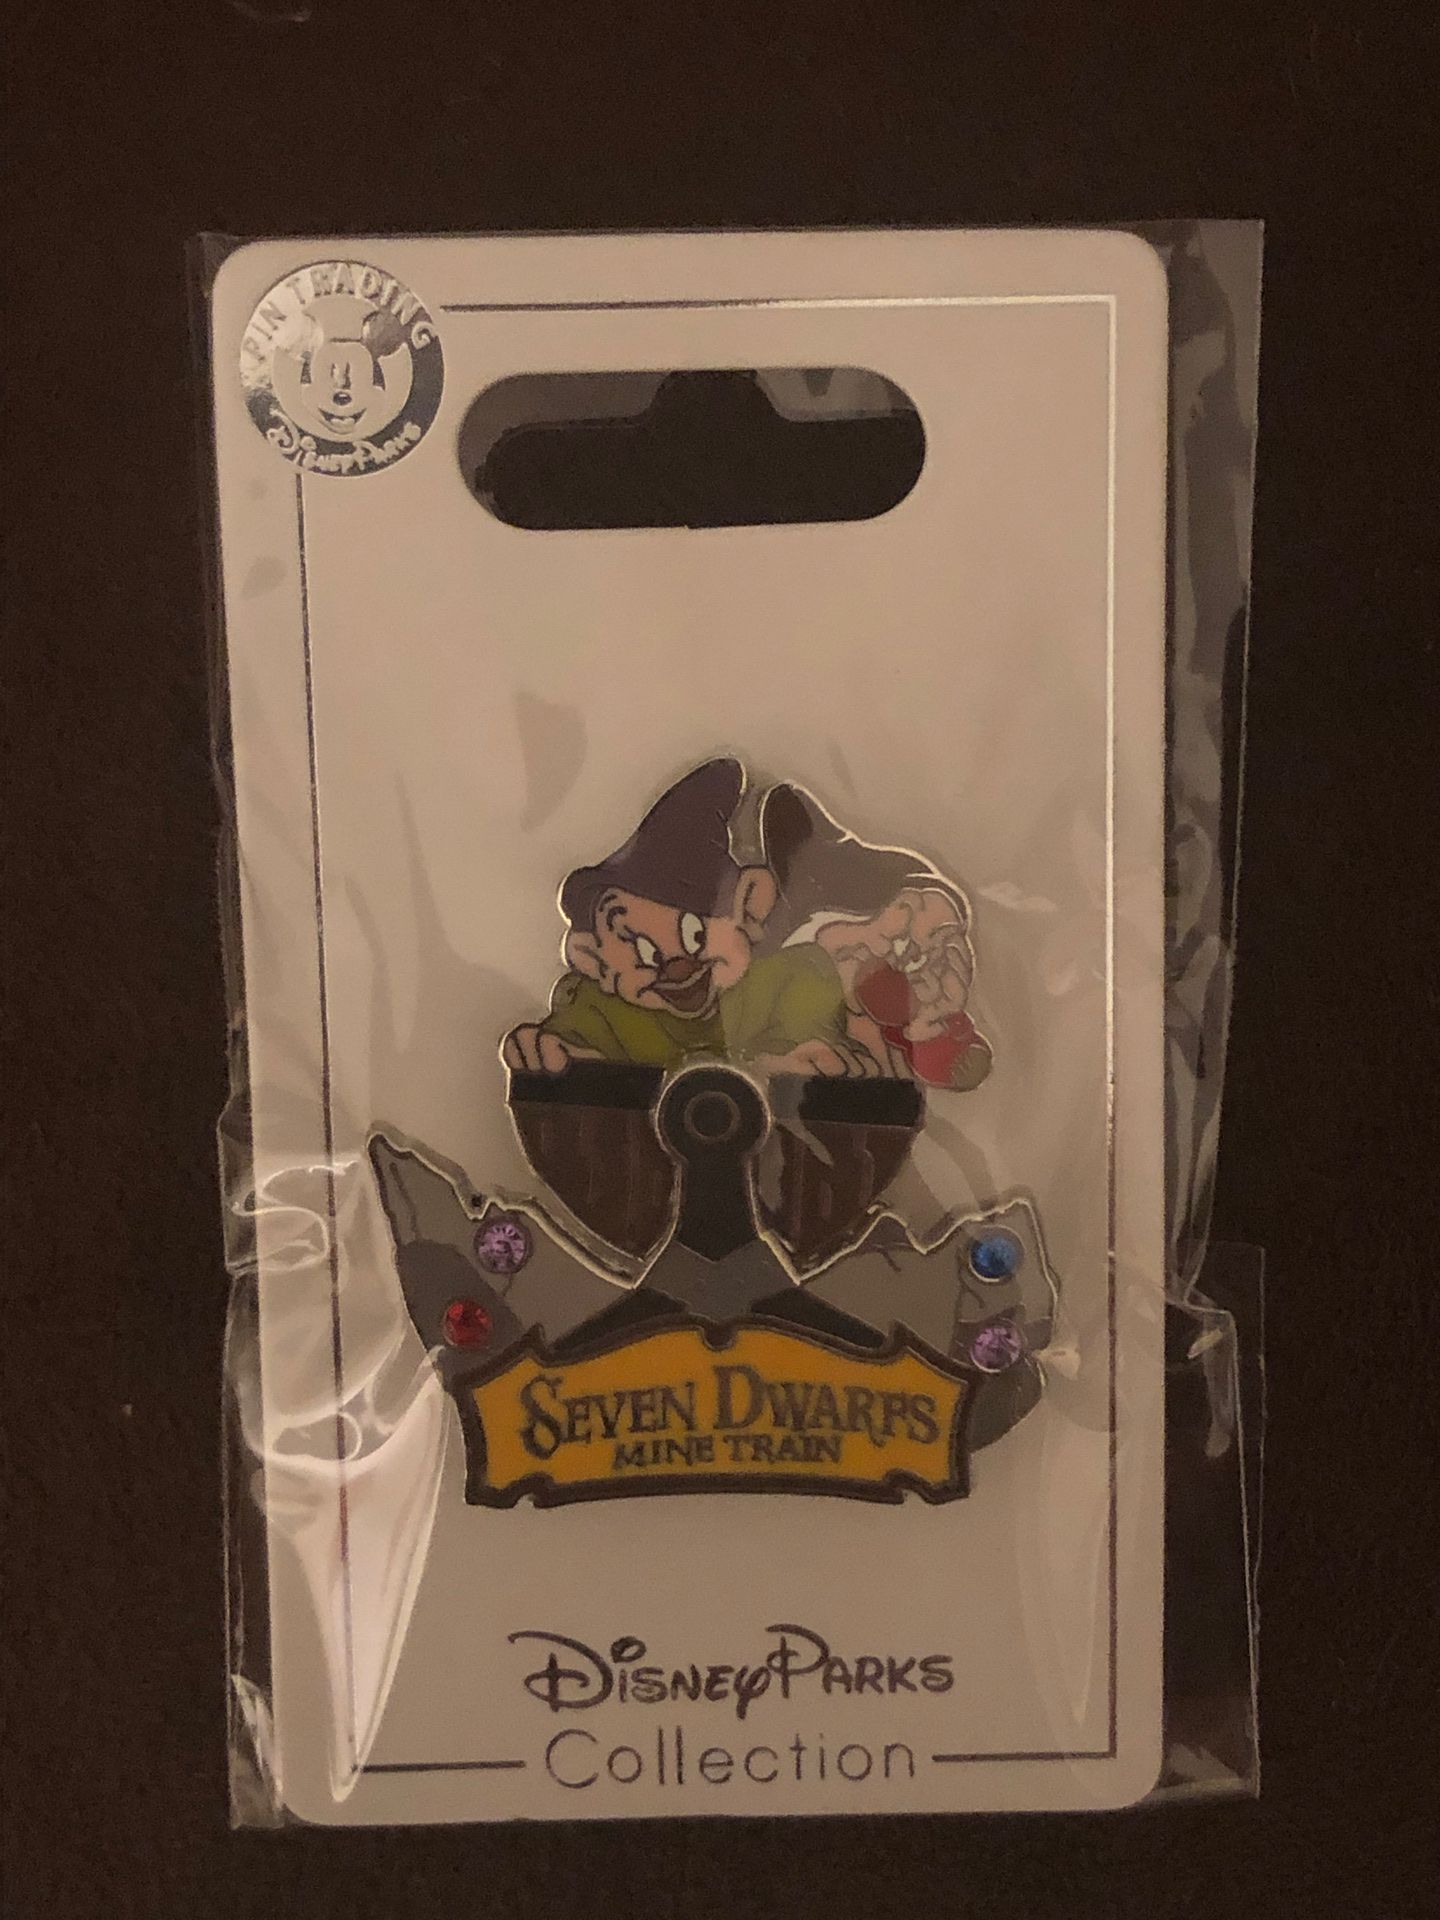 (NEW) Disney Parks Collection (Seven Dwarves Mine Train) Attraction Pin